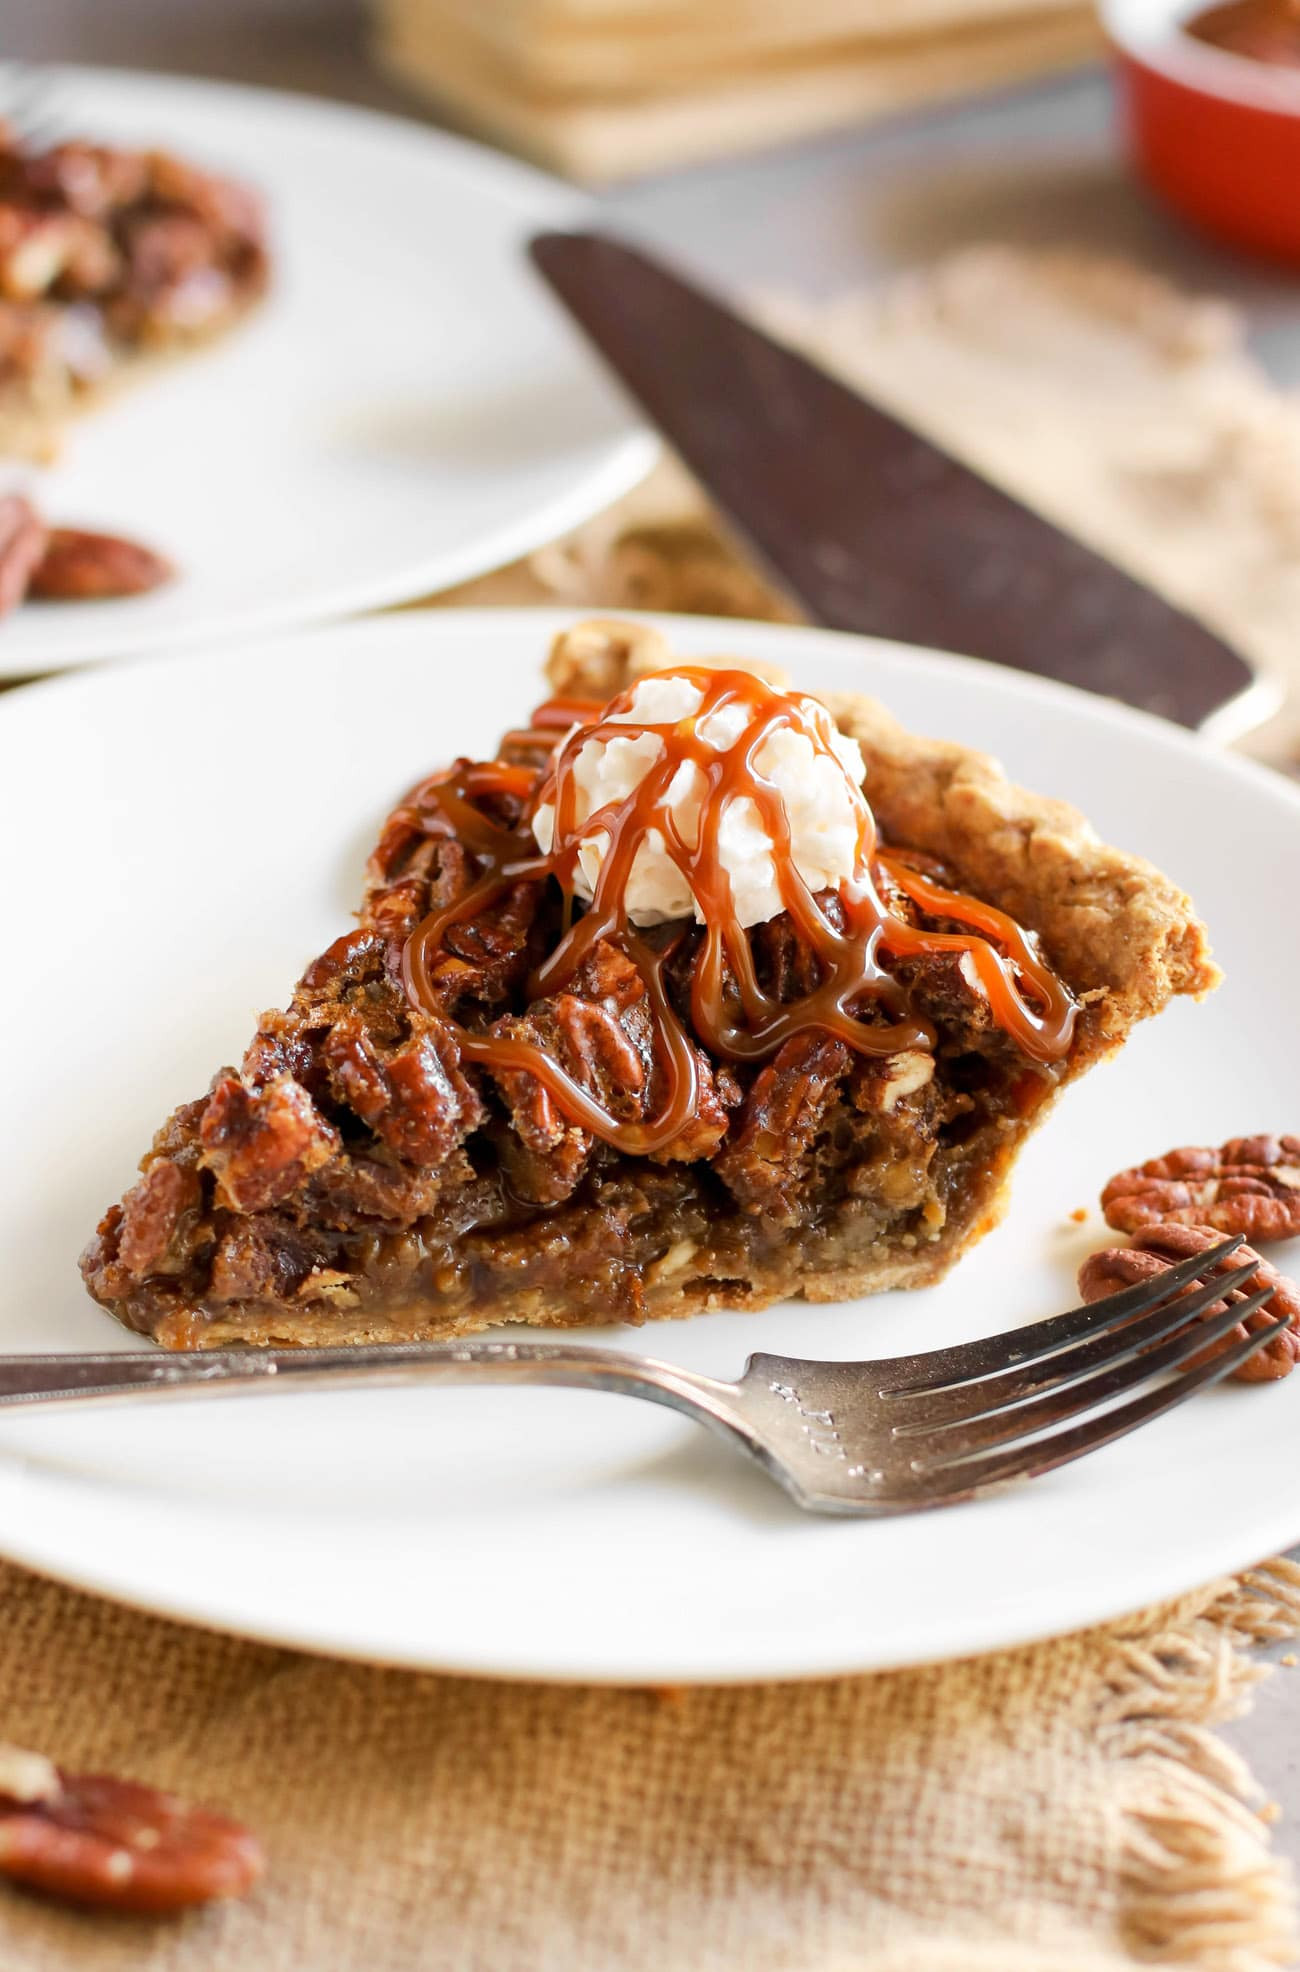 Healthy Pecan Pie Recipe Without Corn Syrup
 Healthy Pecan Pie Recipe without the corn syrup butter